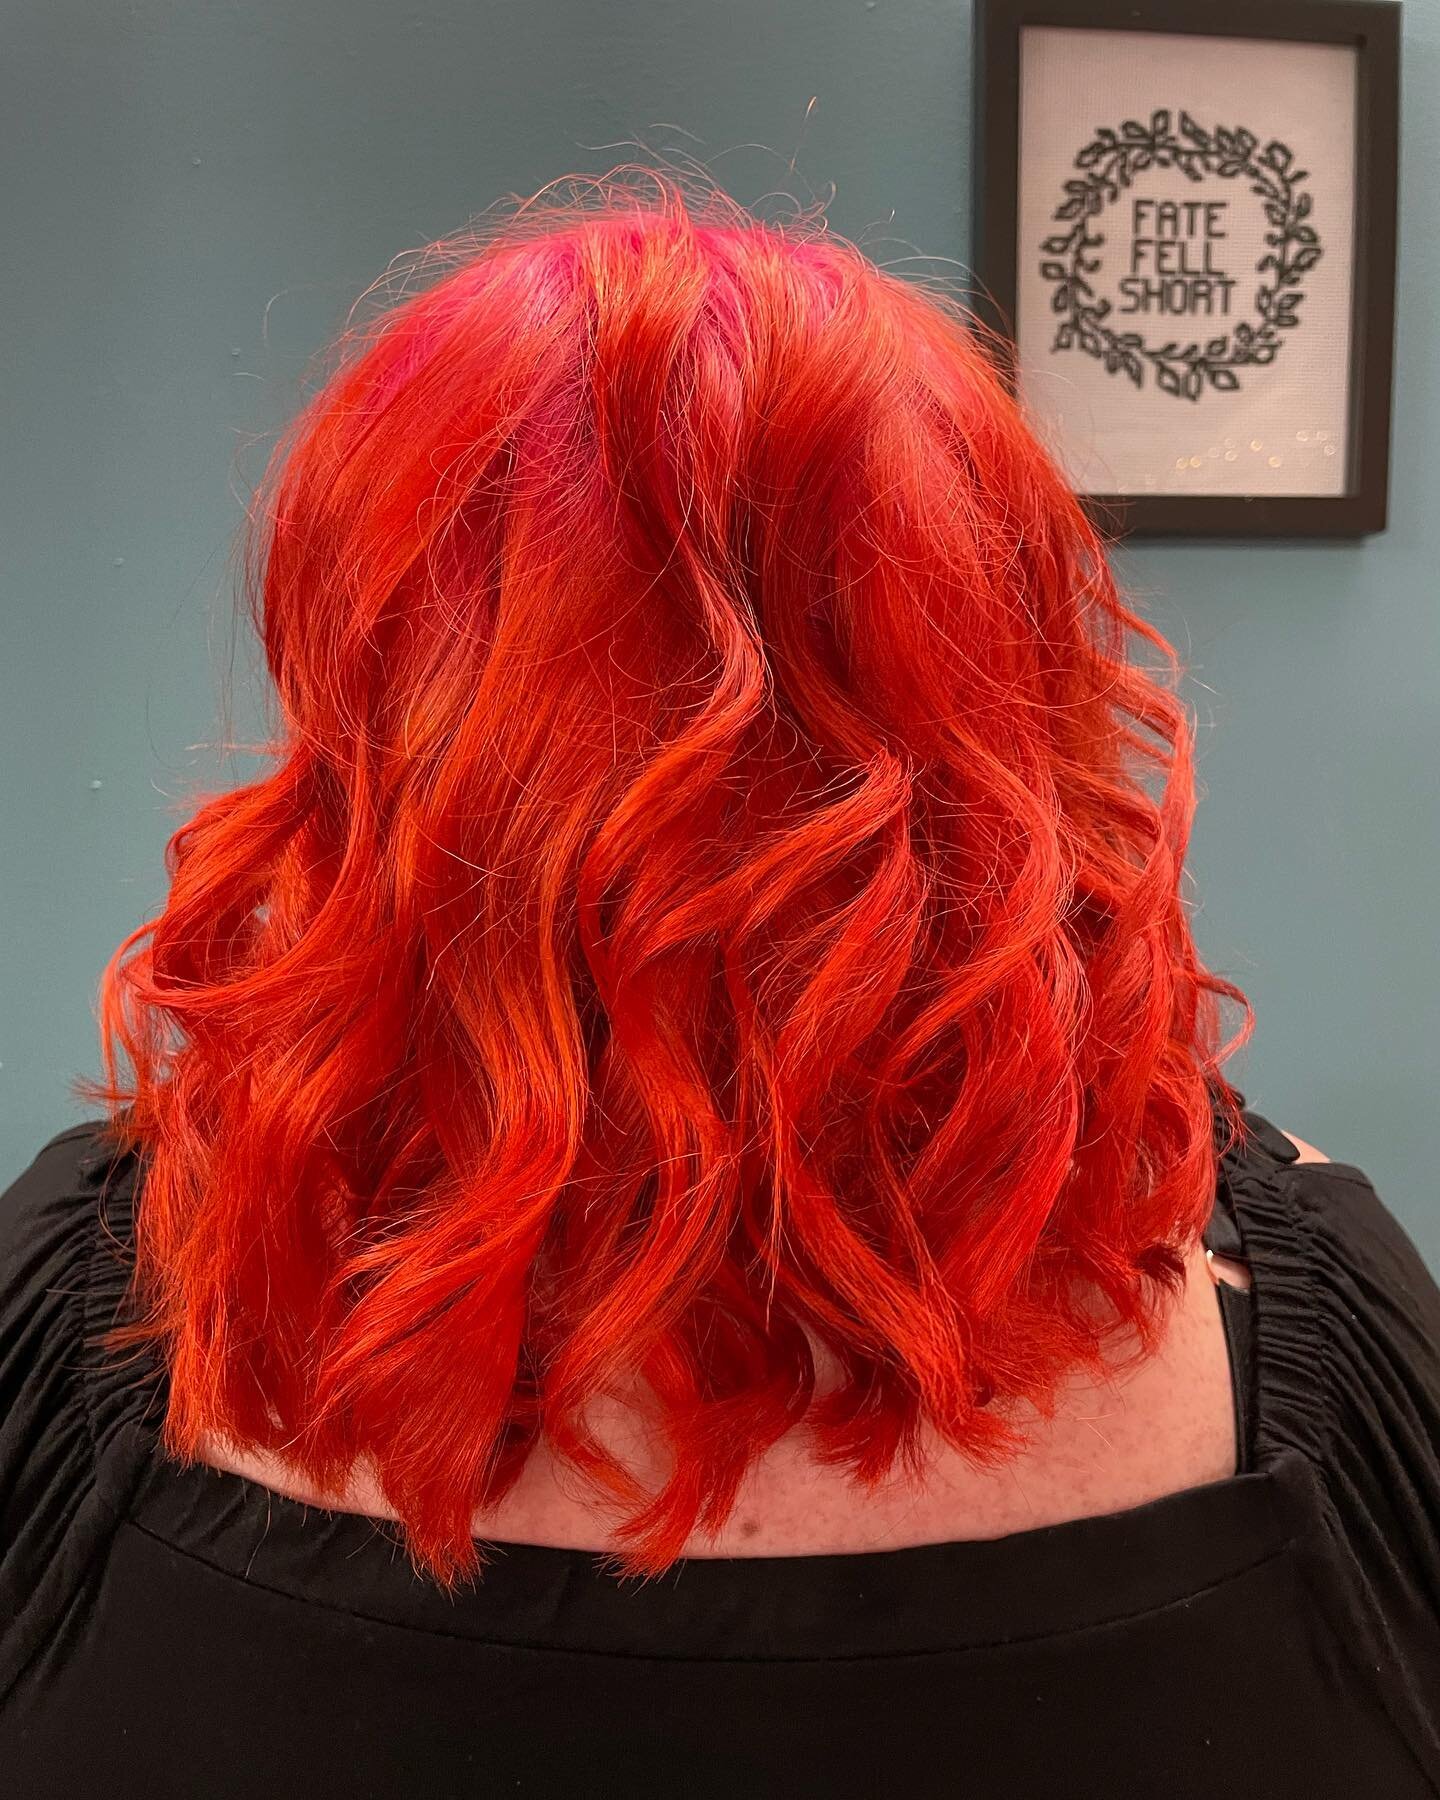 Bright &amp; beautiful hair transformation yesterday&hellip; we took box dyed brown hair to this lovely bright orange with pink toned roots 🧡💓 &ldquo;just like candyyy&rdquo;
.
.
.
.
.
#hairtransformation #brighthairdontcare #orangehair #hair #hair